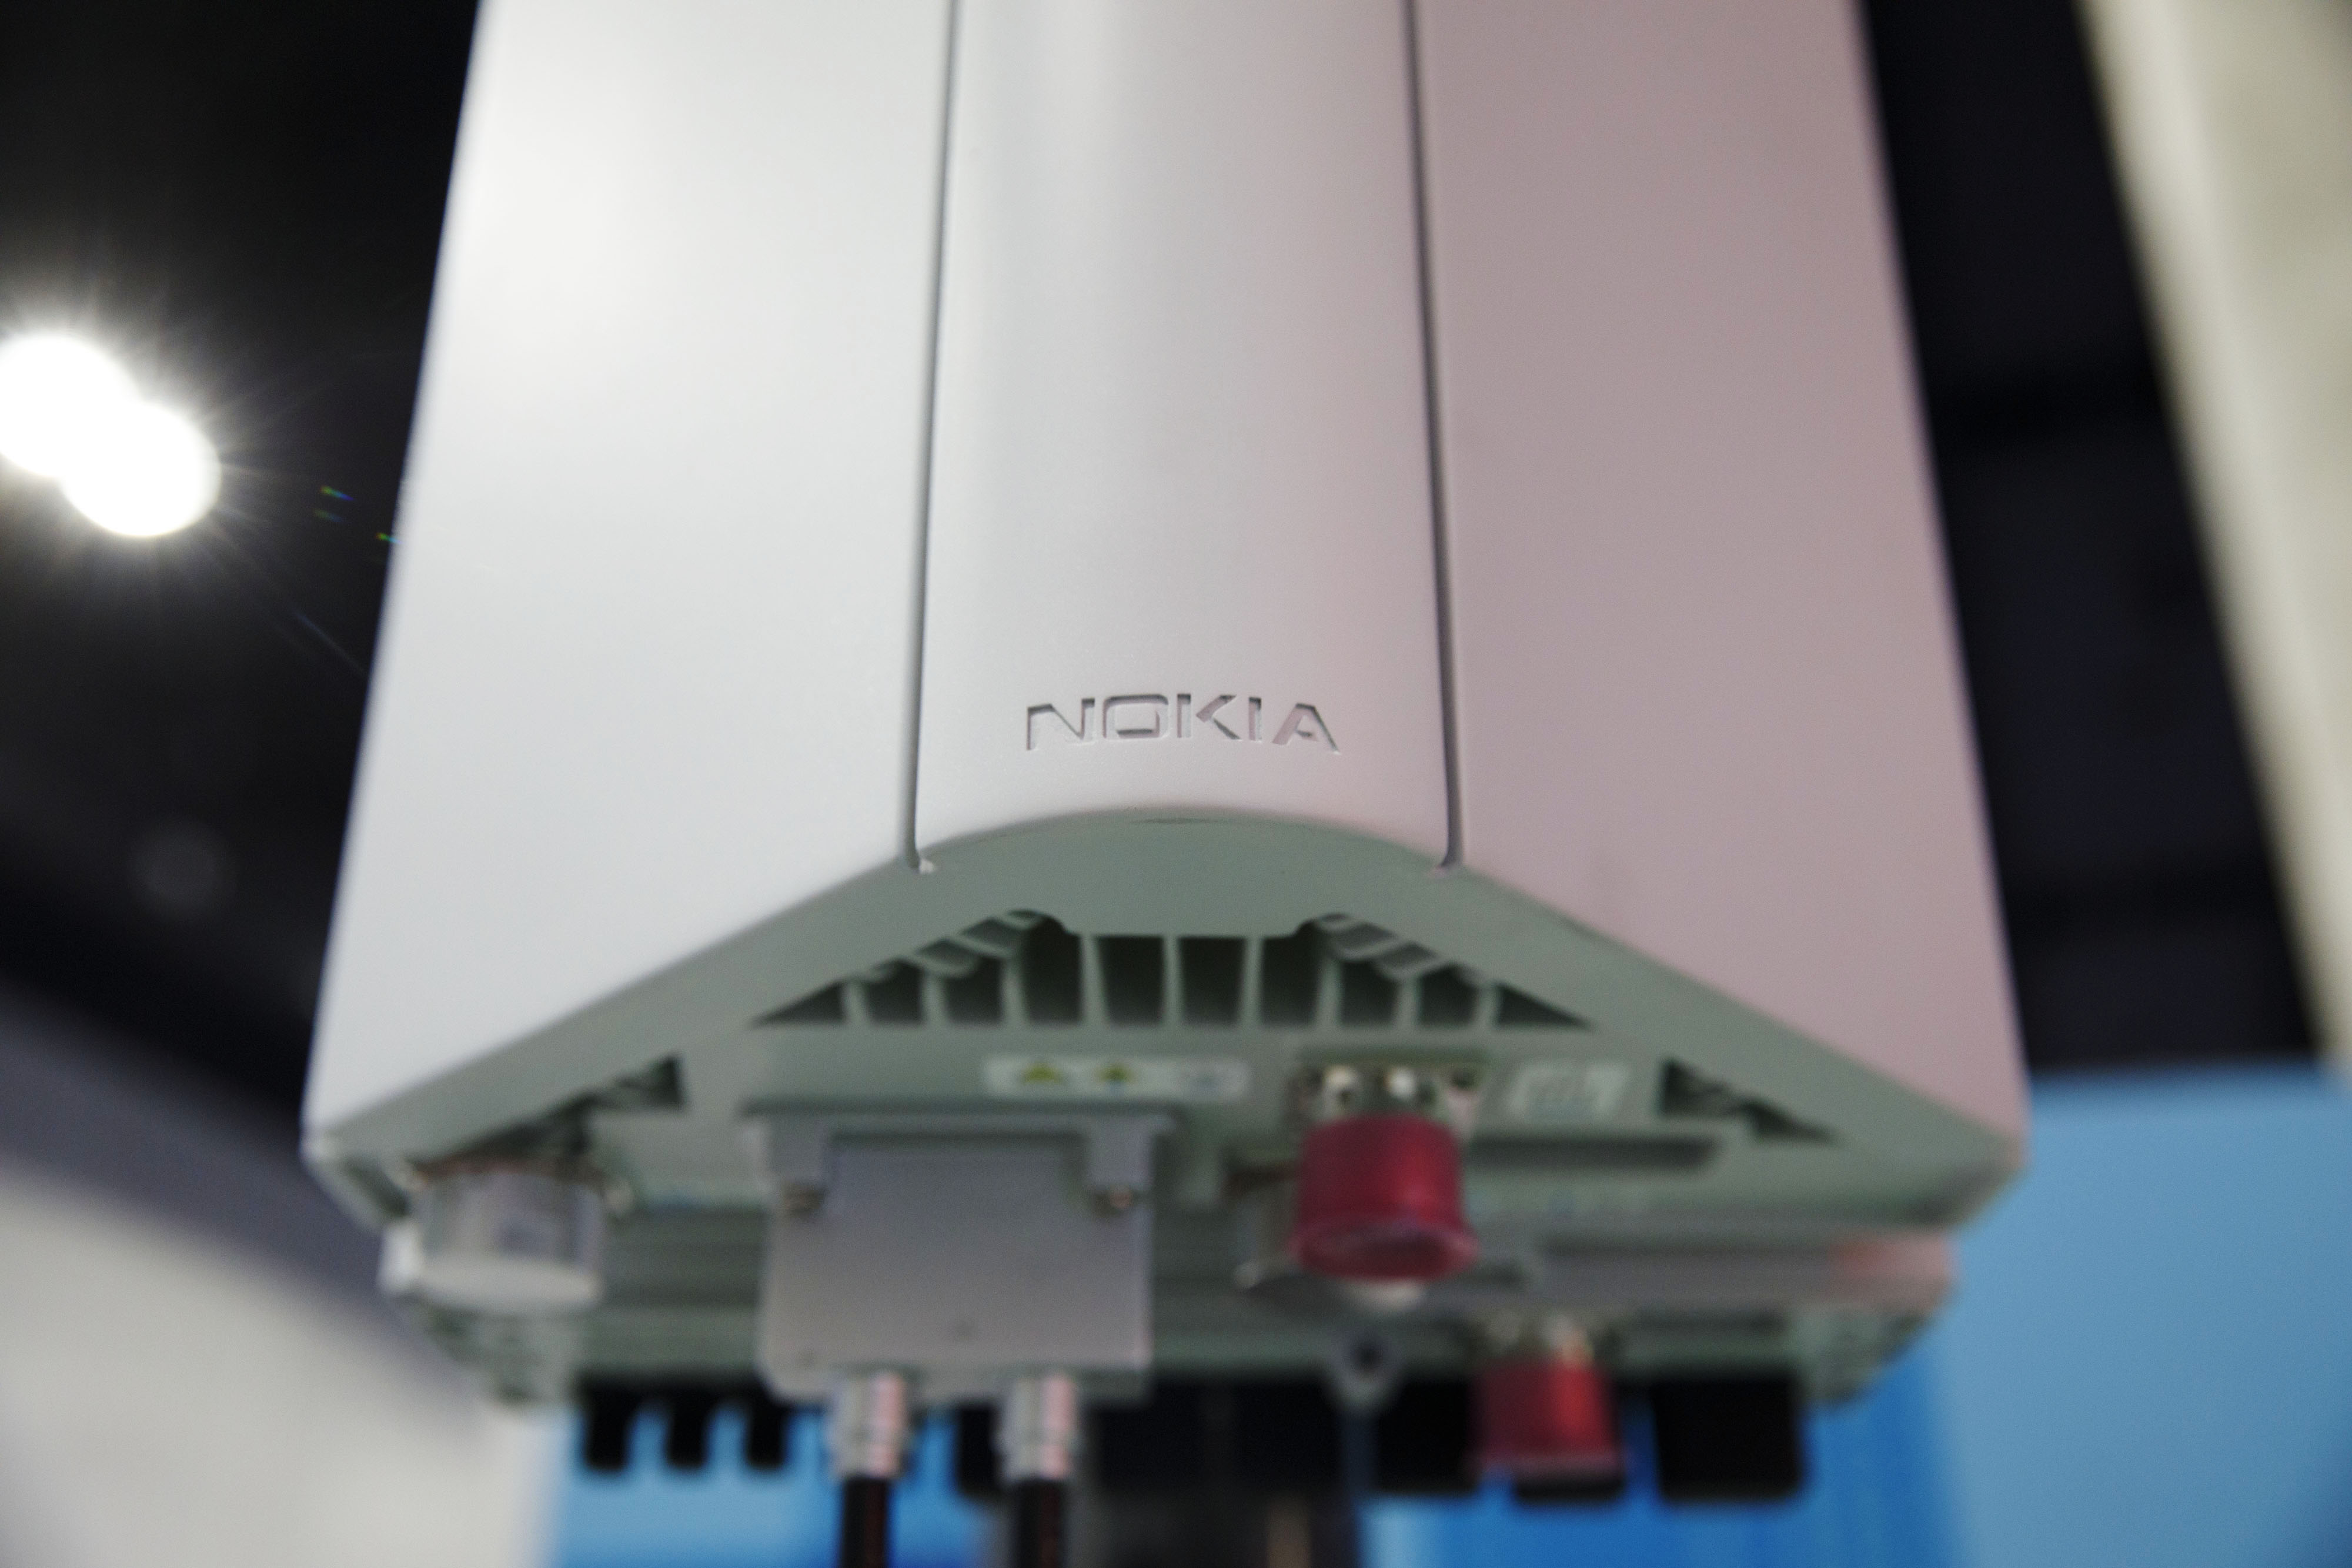 A Nokia OYJ ultra deployable 5G Massive MIMO millimeter wave antenna.